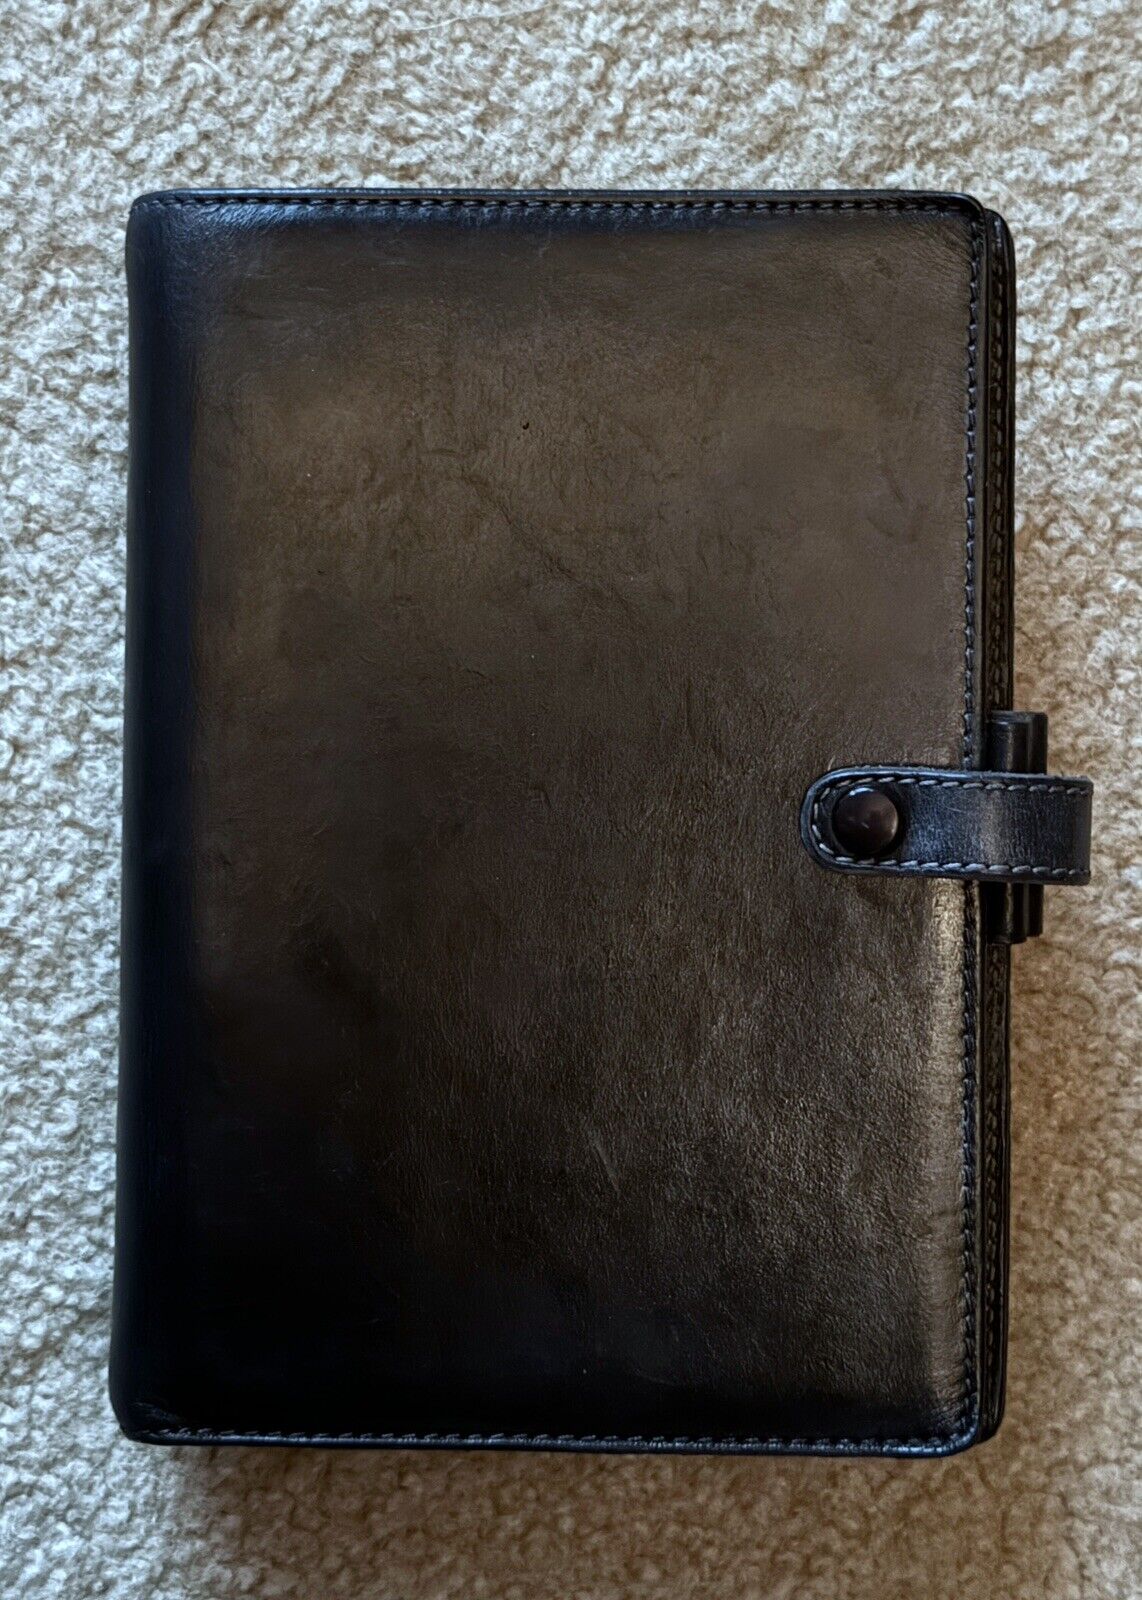 Vintage FiloFAX Personal “Sandhurst” Leather Planner (Rare). Italy, 6 Rings.